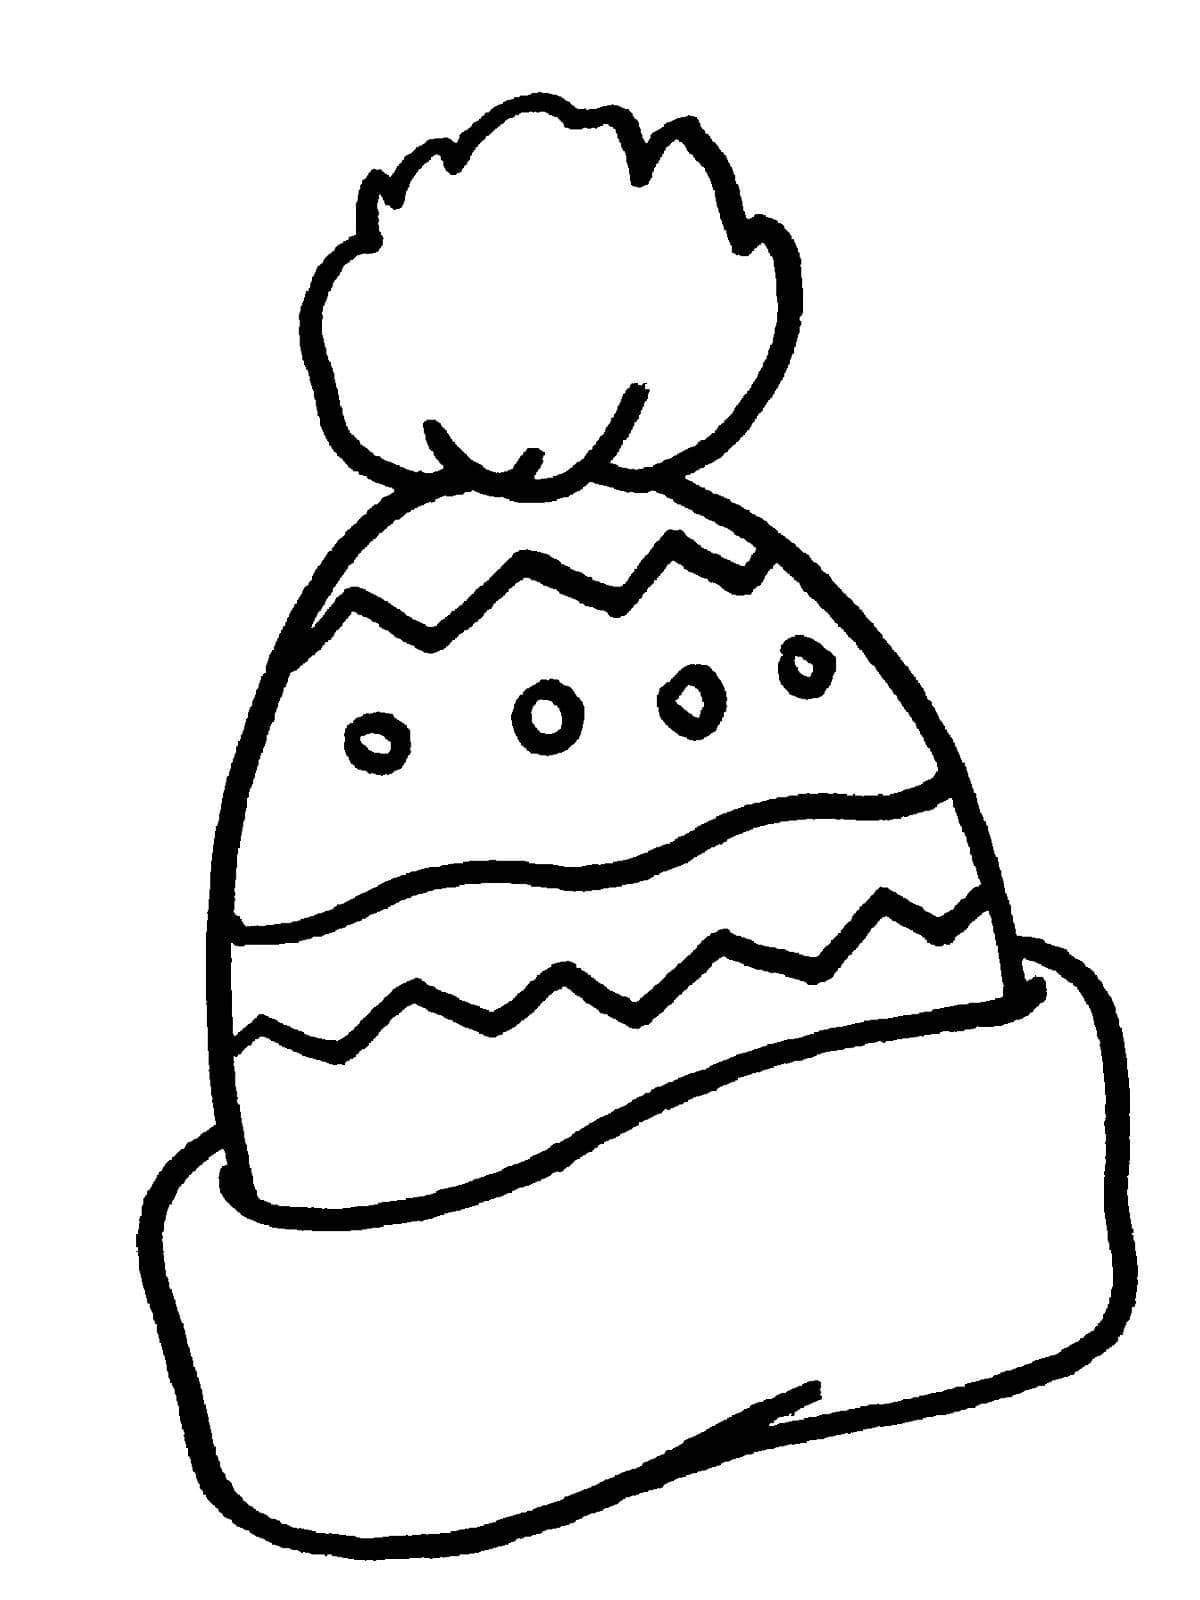 Coloring page elegant hat for students